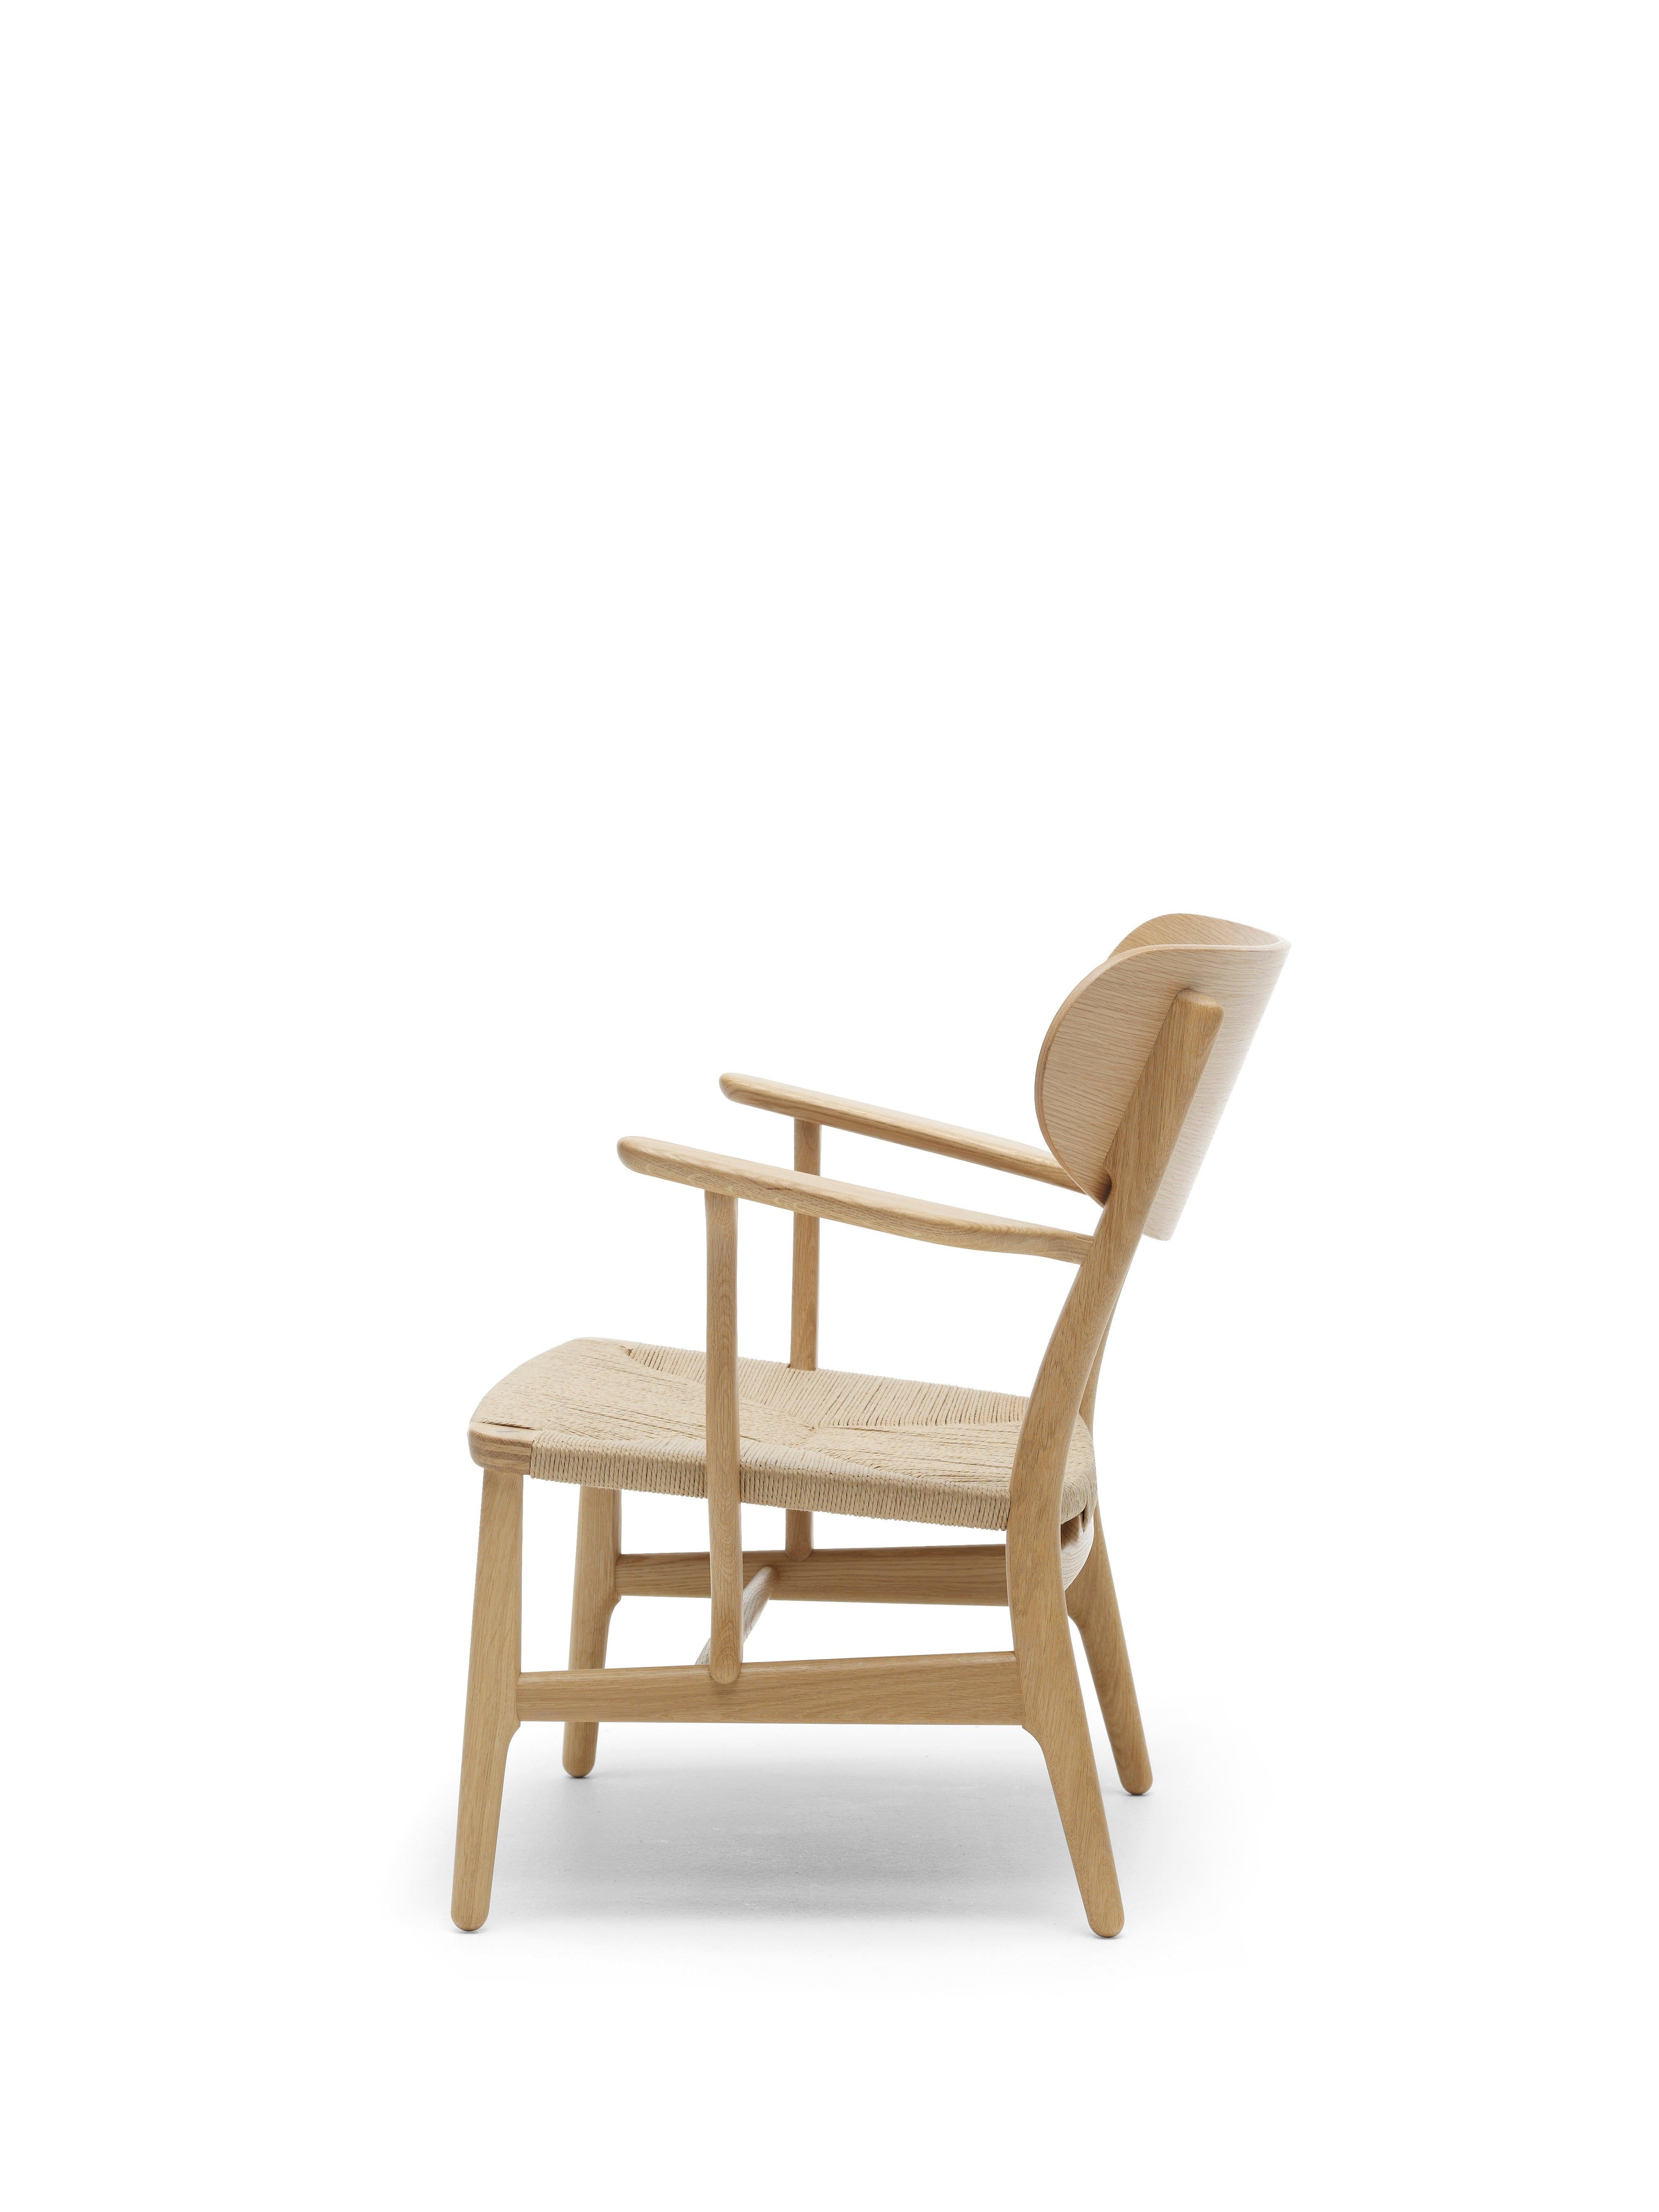 Modern CH22 Lounge Chair in Oak Oil with Natural Papercord Seat by Hans J. Wegner